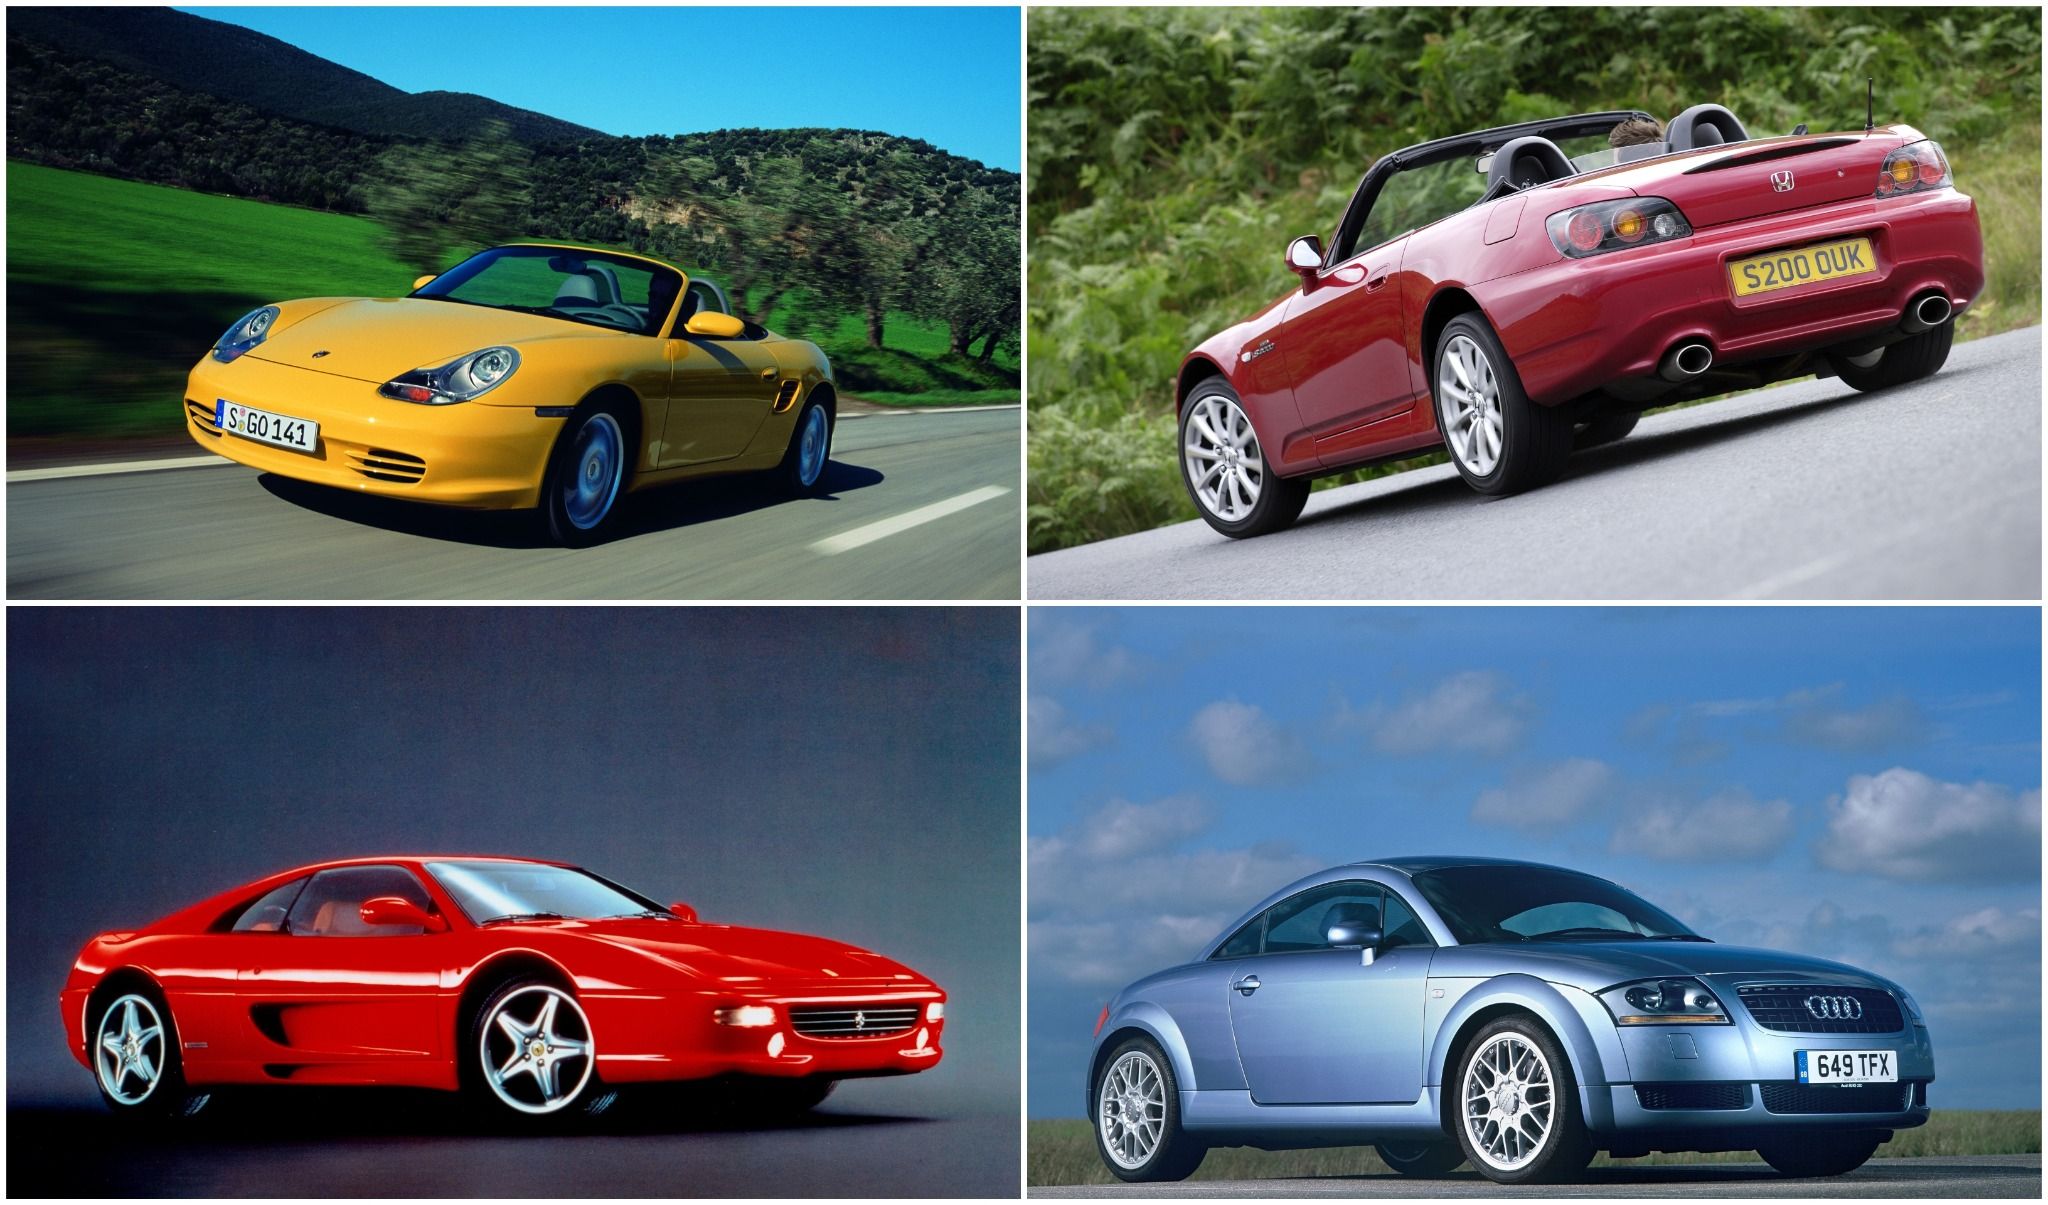 Collage of Iconic Cars of the 1990s